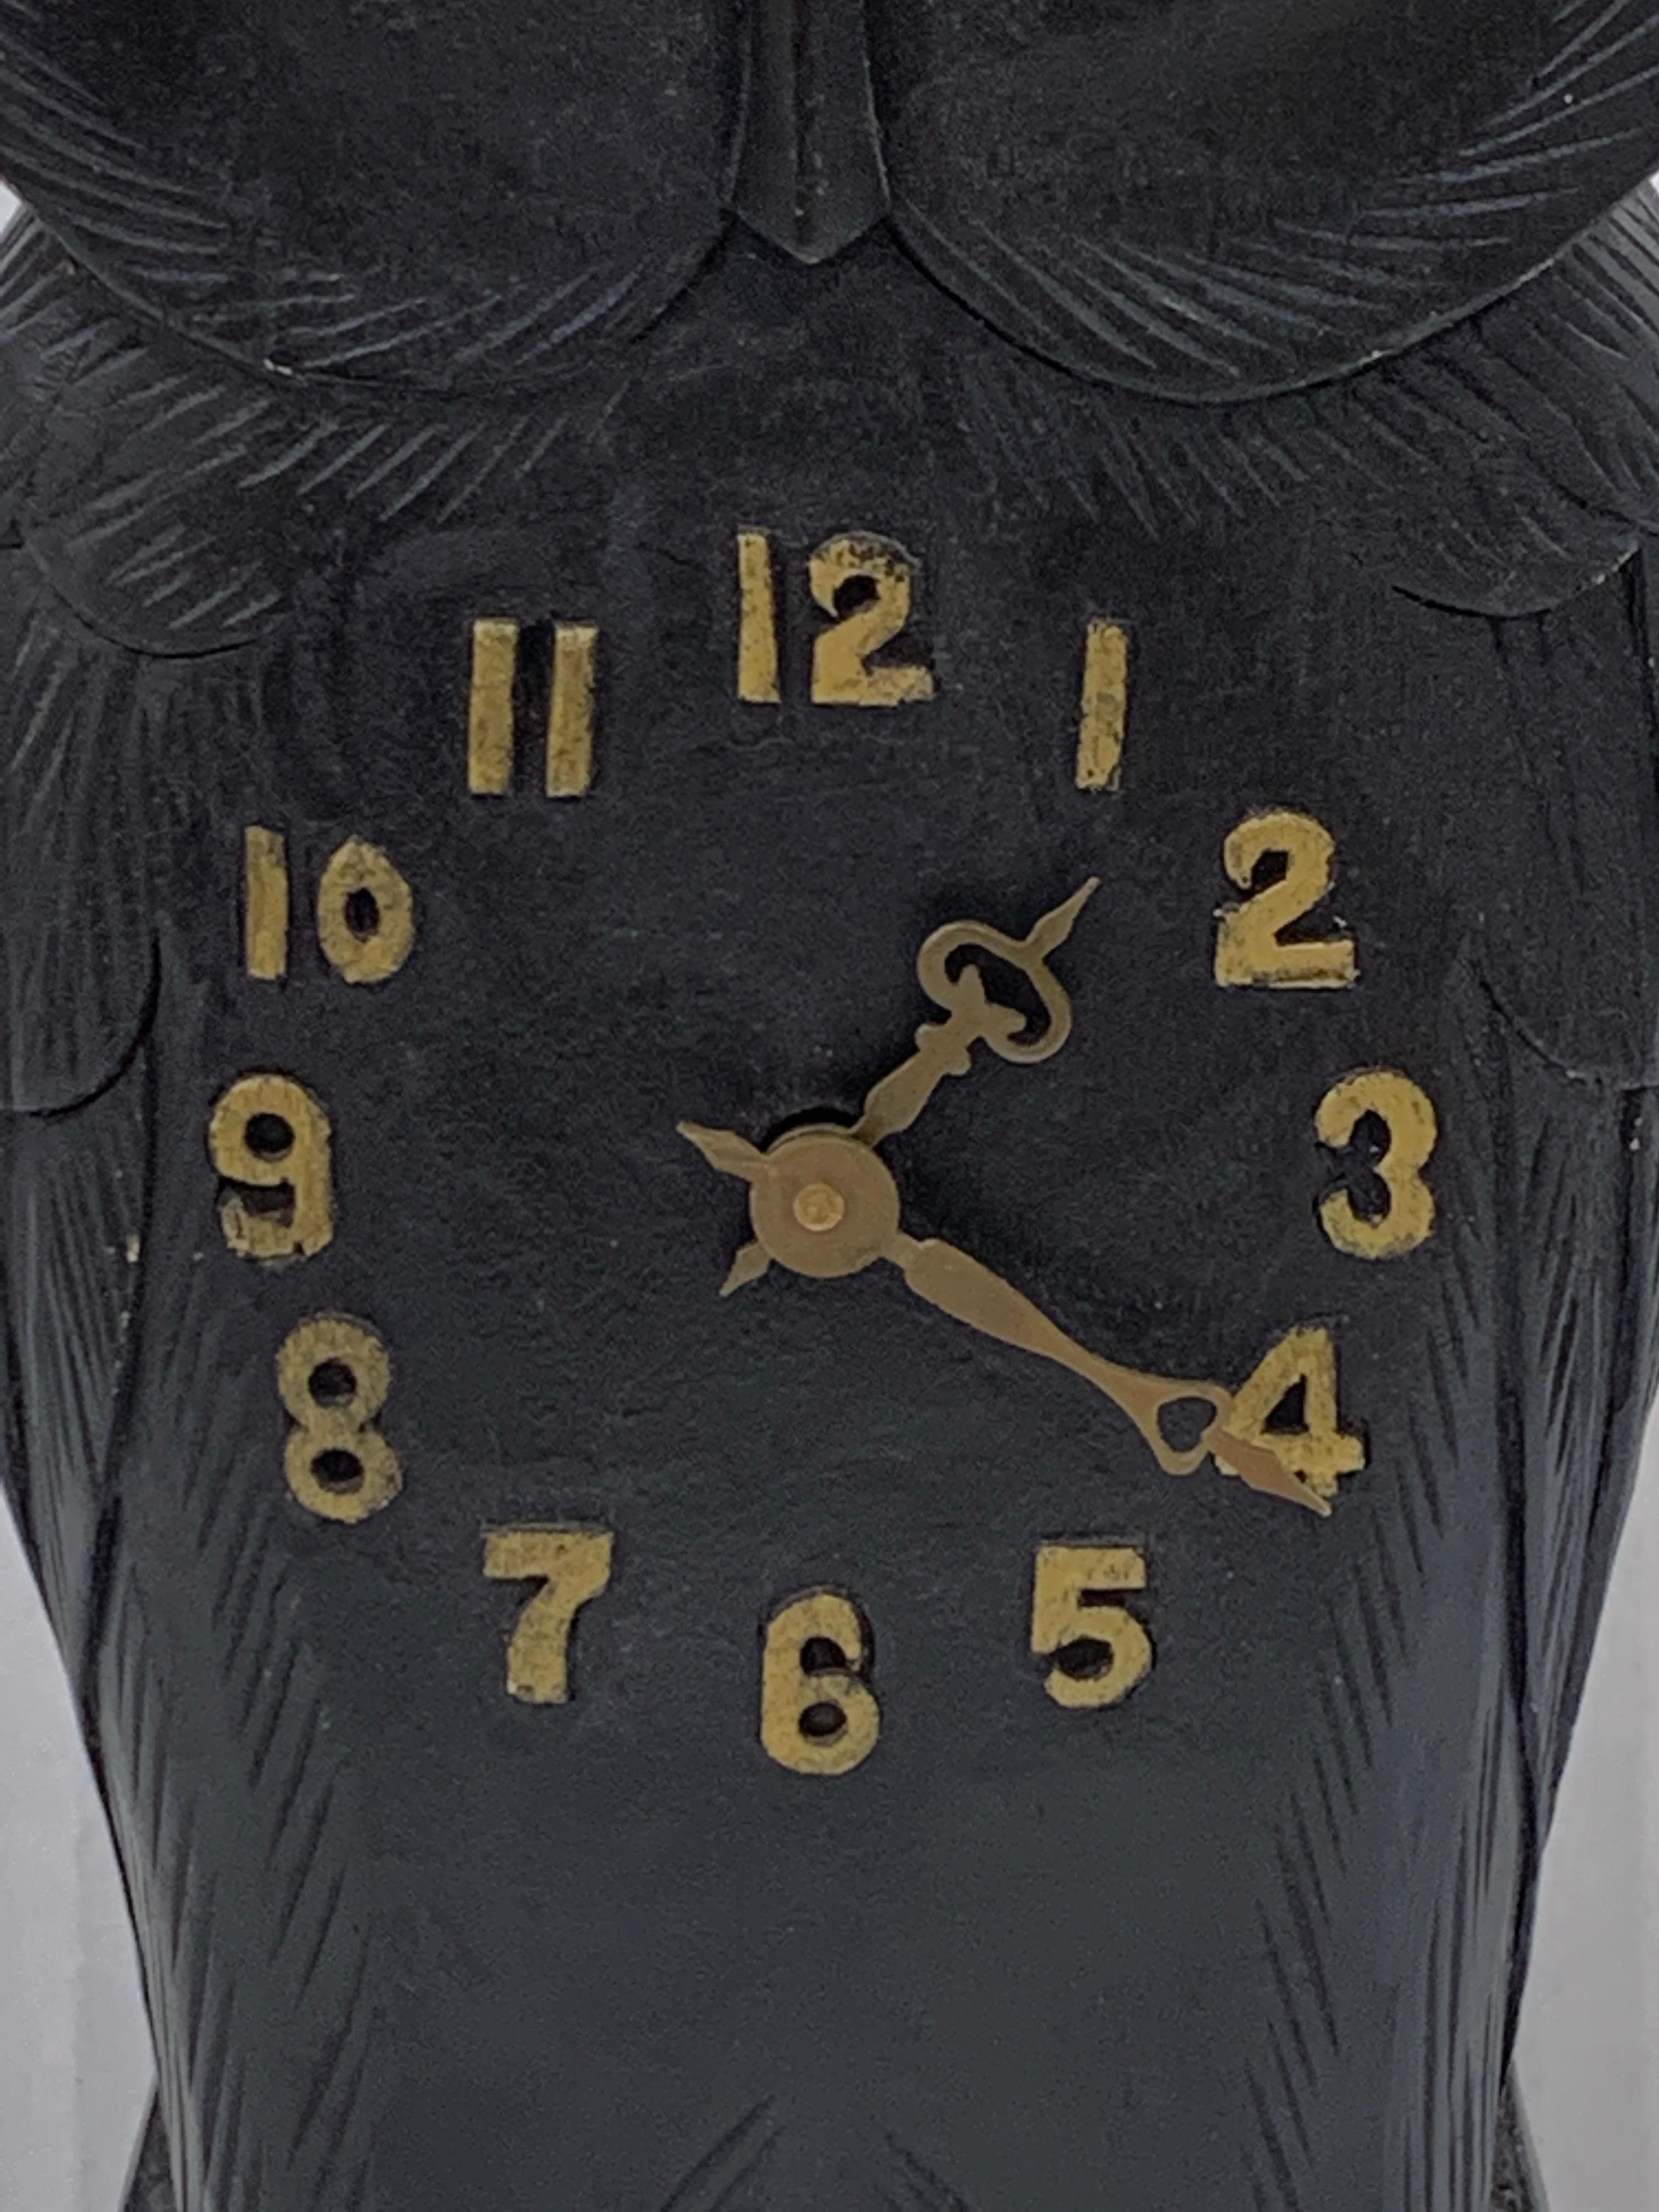 Black forest owl clock, with moving eyes to the left and right.
Runs when wound, unsure of accuracy of time.